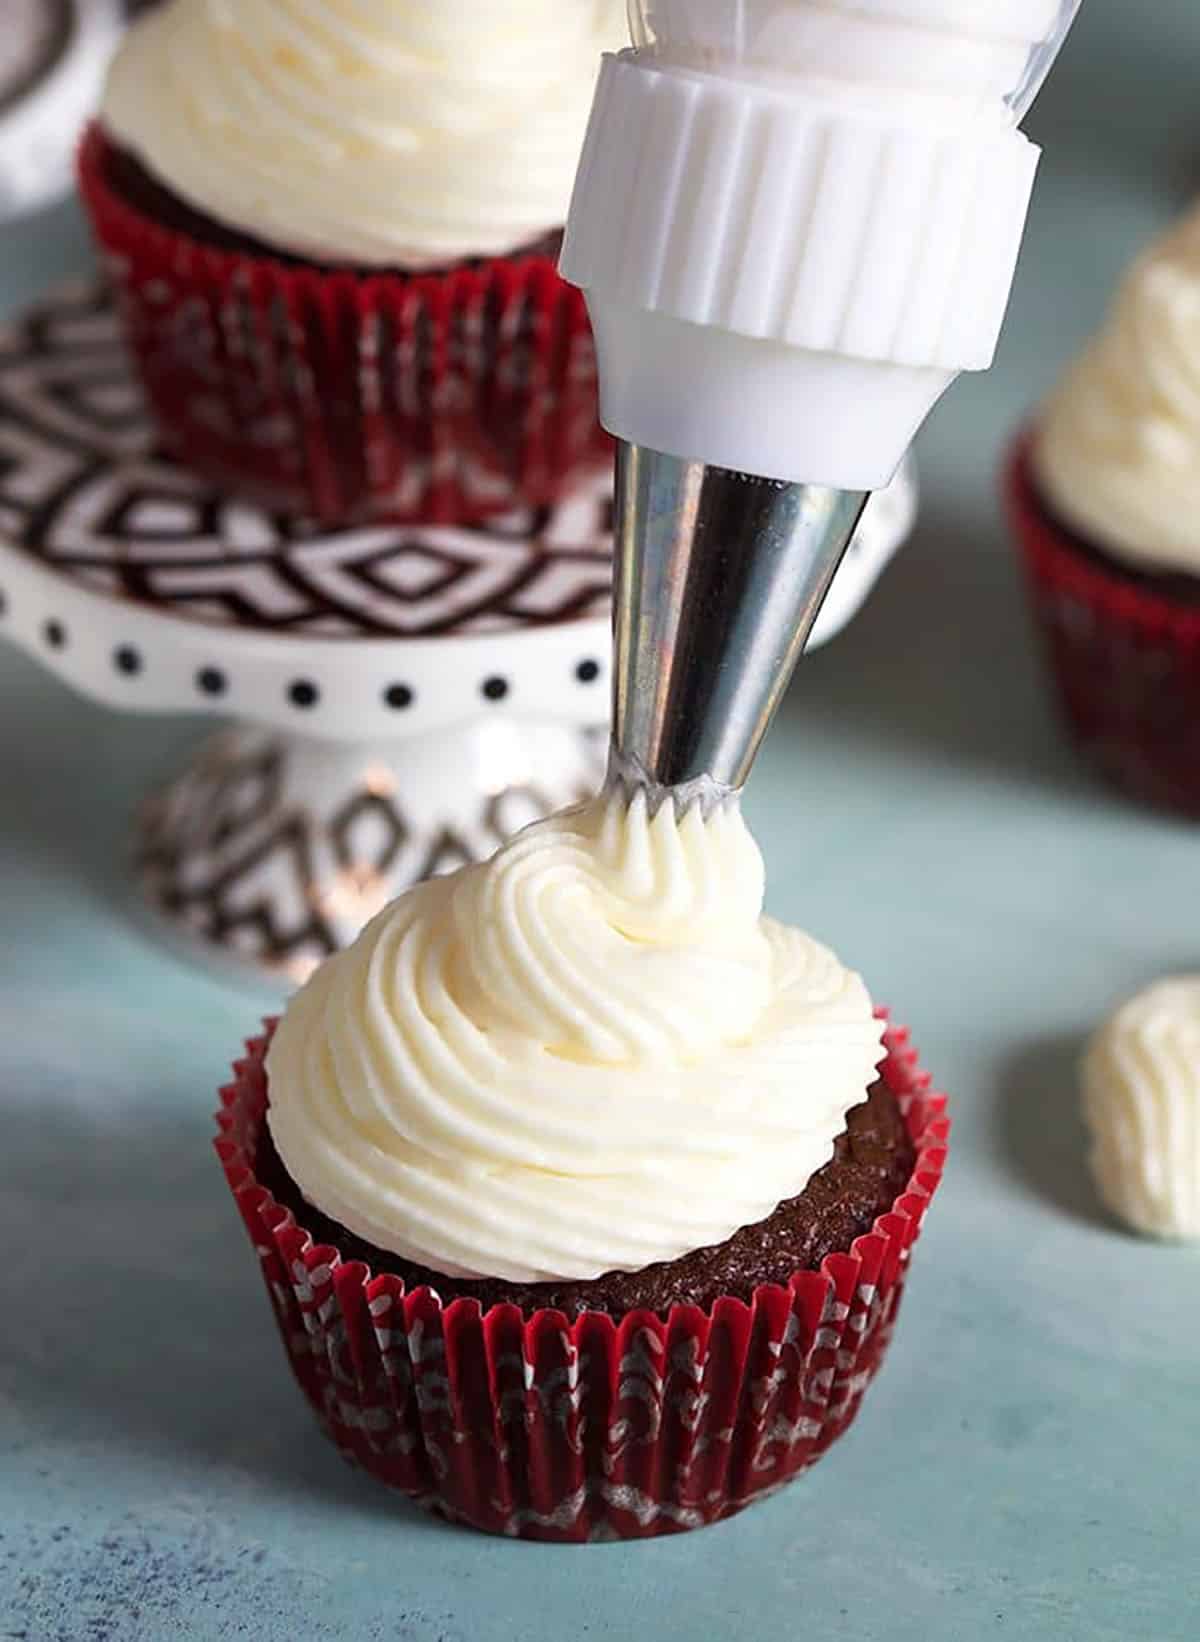 Cream cheese frosting being piped onto a chocolate cupcake.